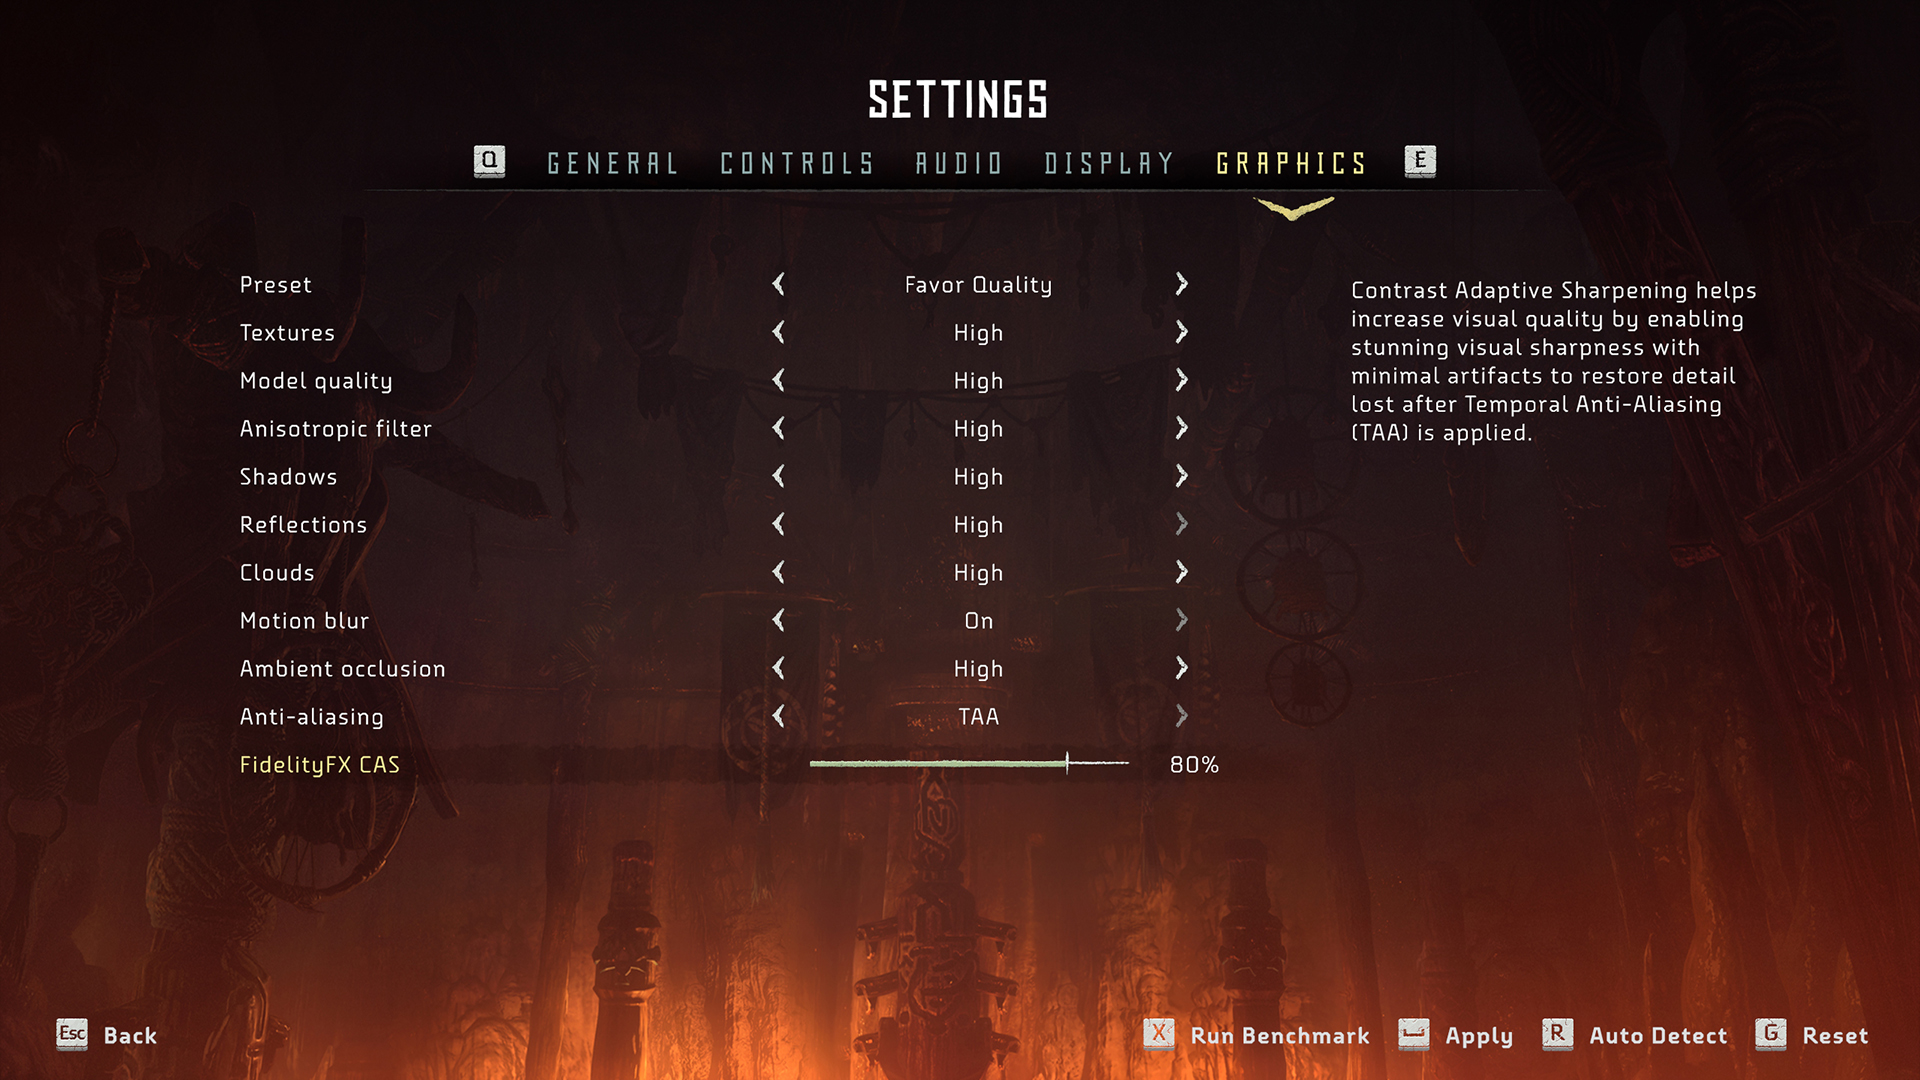 The options menu for Horizon Zero Dawn, FidelityFX Contrast Adaptive Sharpening is selected.